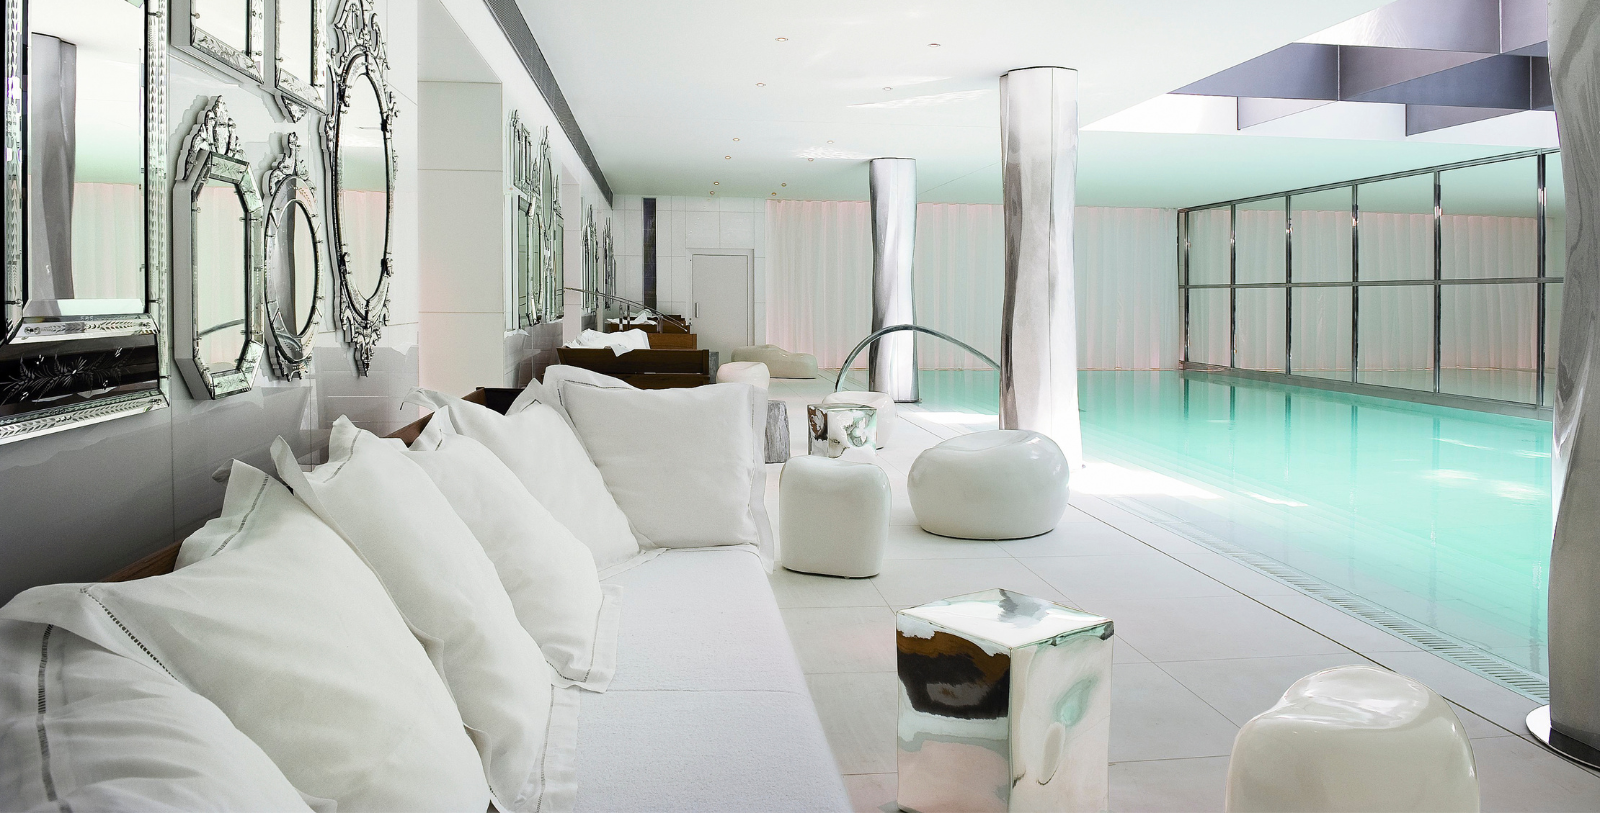 Image of Clarins & myBlend Spa at Le Royal Monceau-Raffles Paris, 1928, Member of Historic Hotels Worldwide, in Paris, France